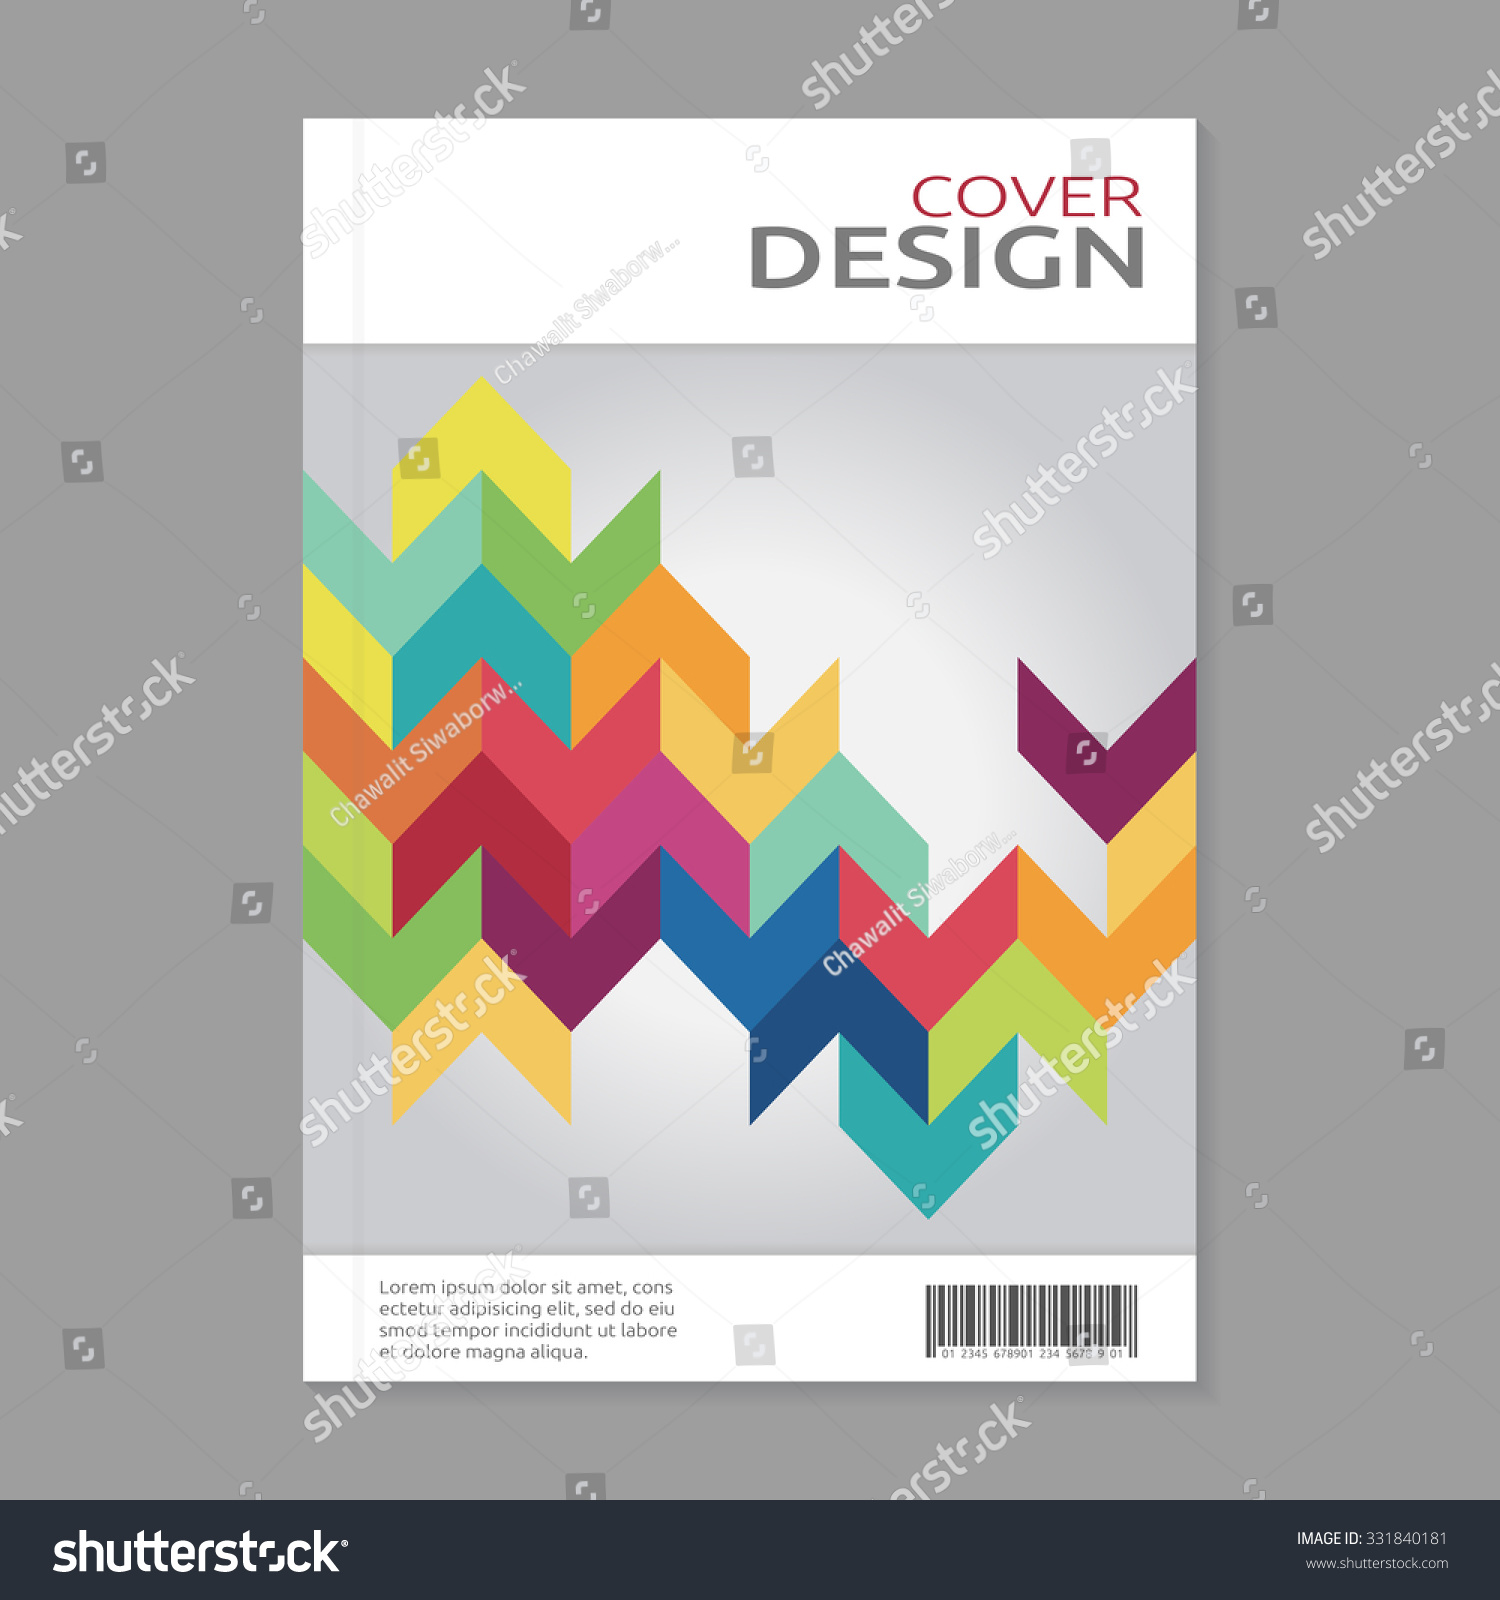 Book Cover Design Template from image.shutterstock.com